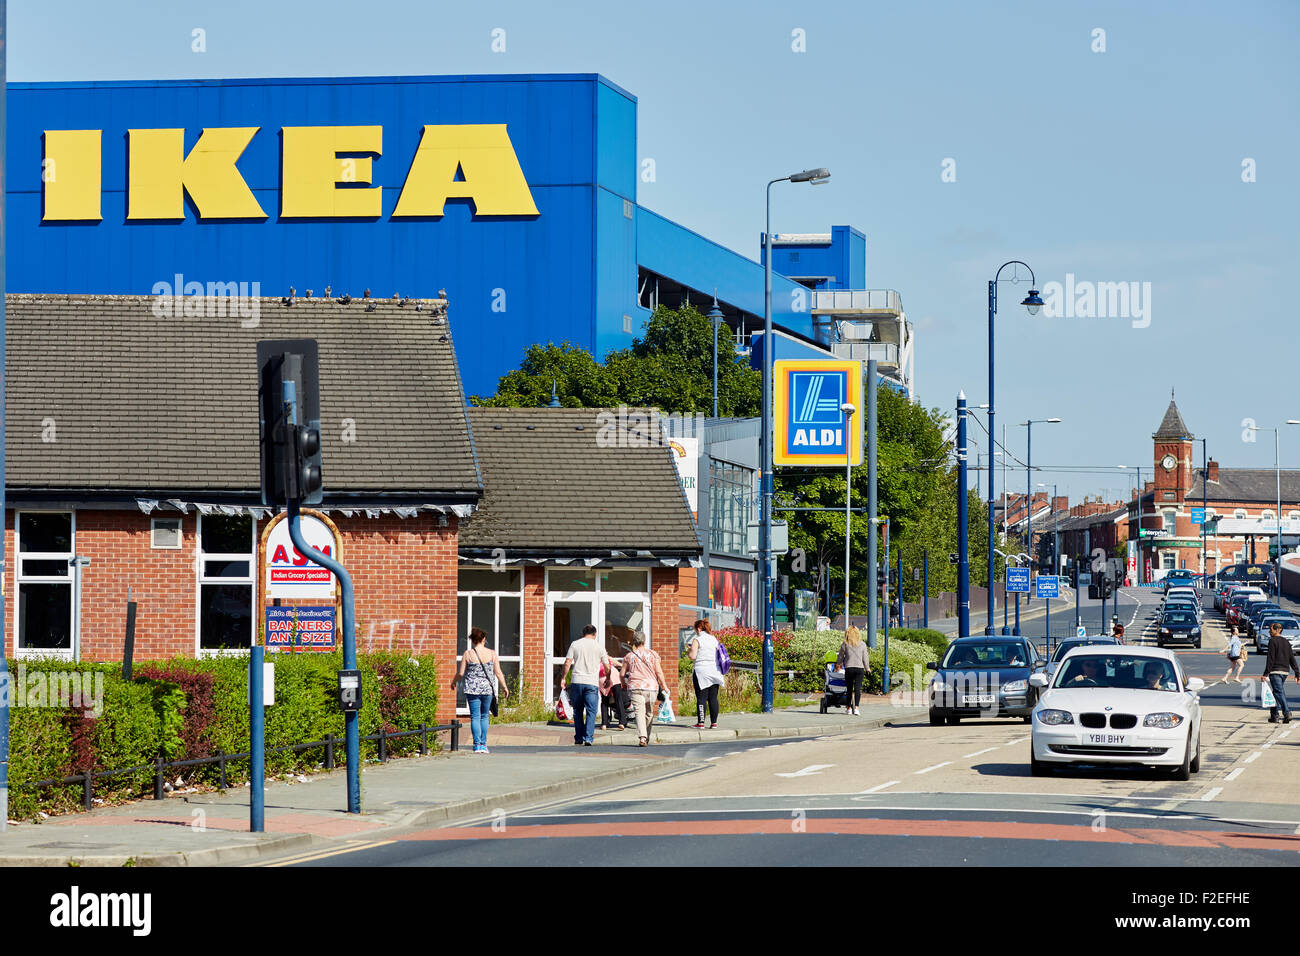 Ikea furniture store exterior on a sunny day in Aston-under-Lyne Tameside  Gtr Manchester Uk Stock Photo - Alamy